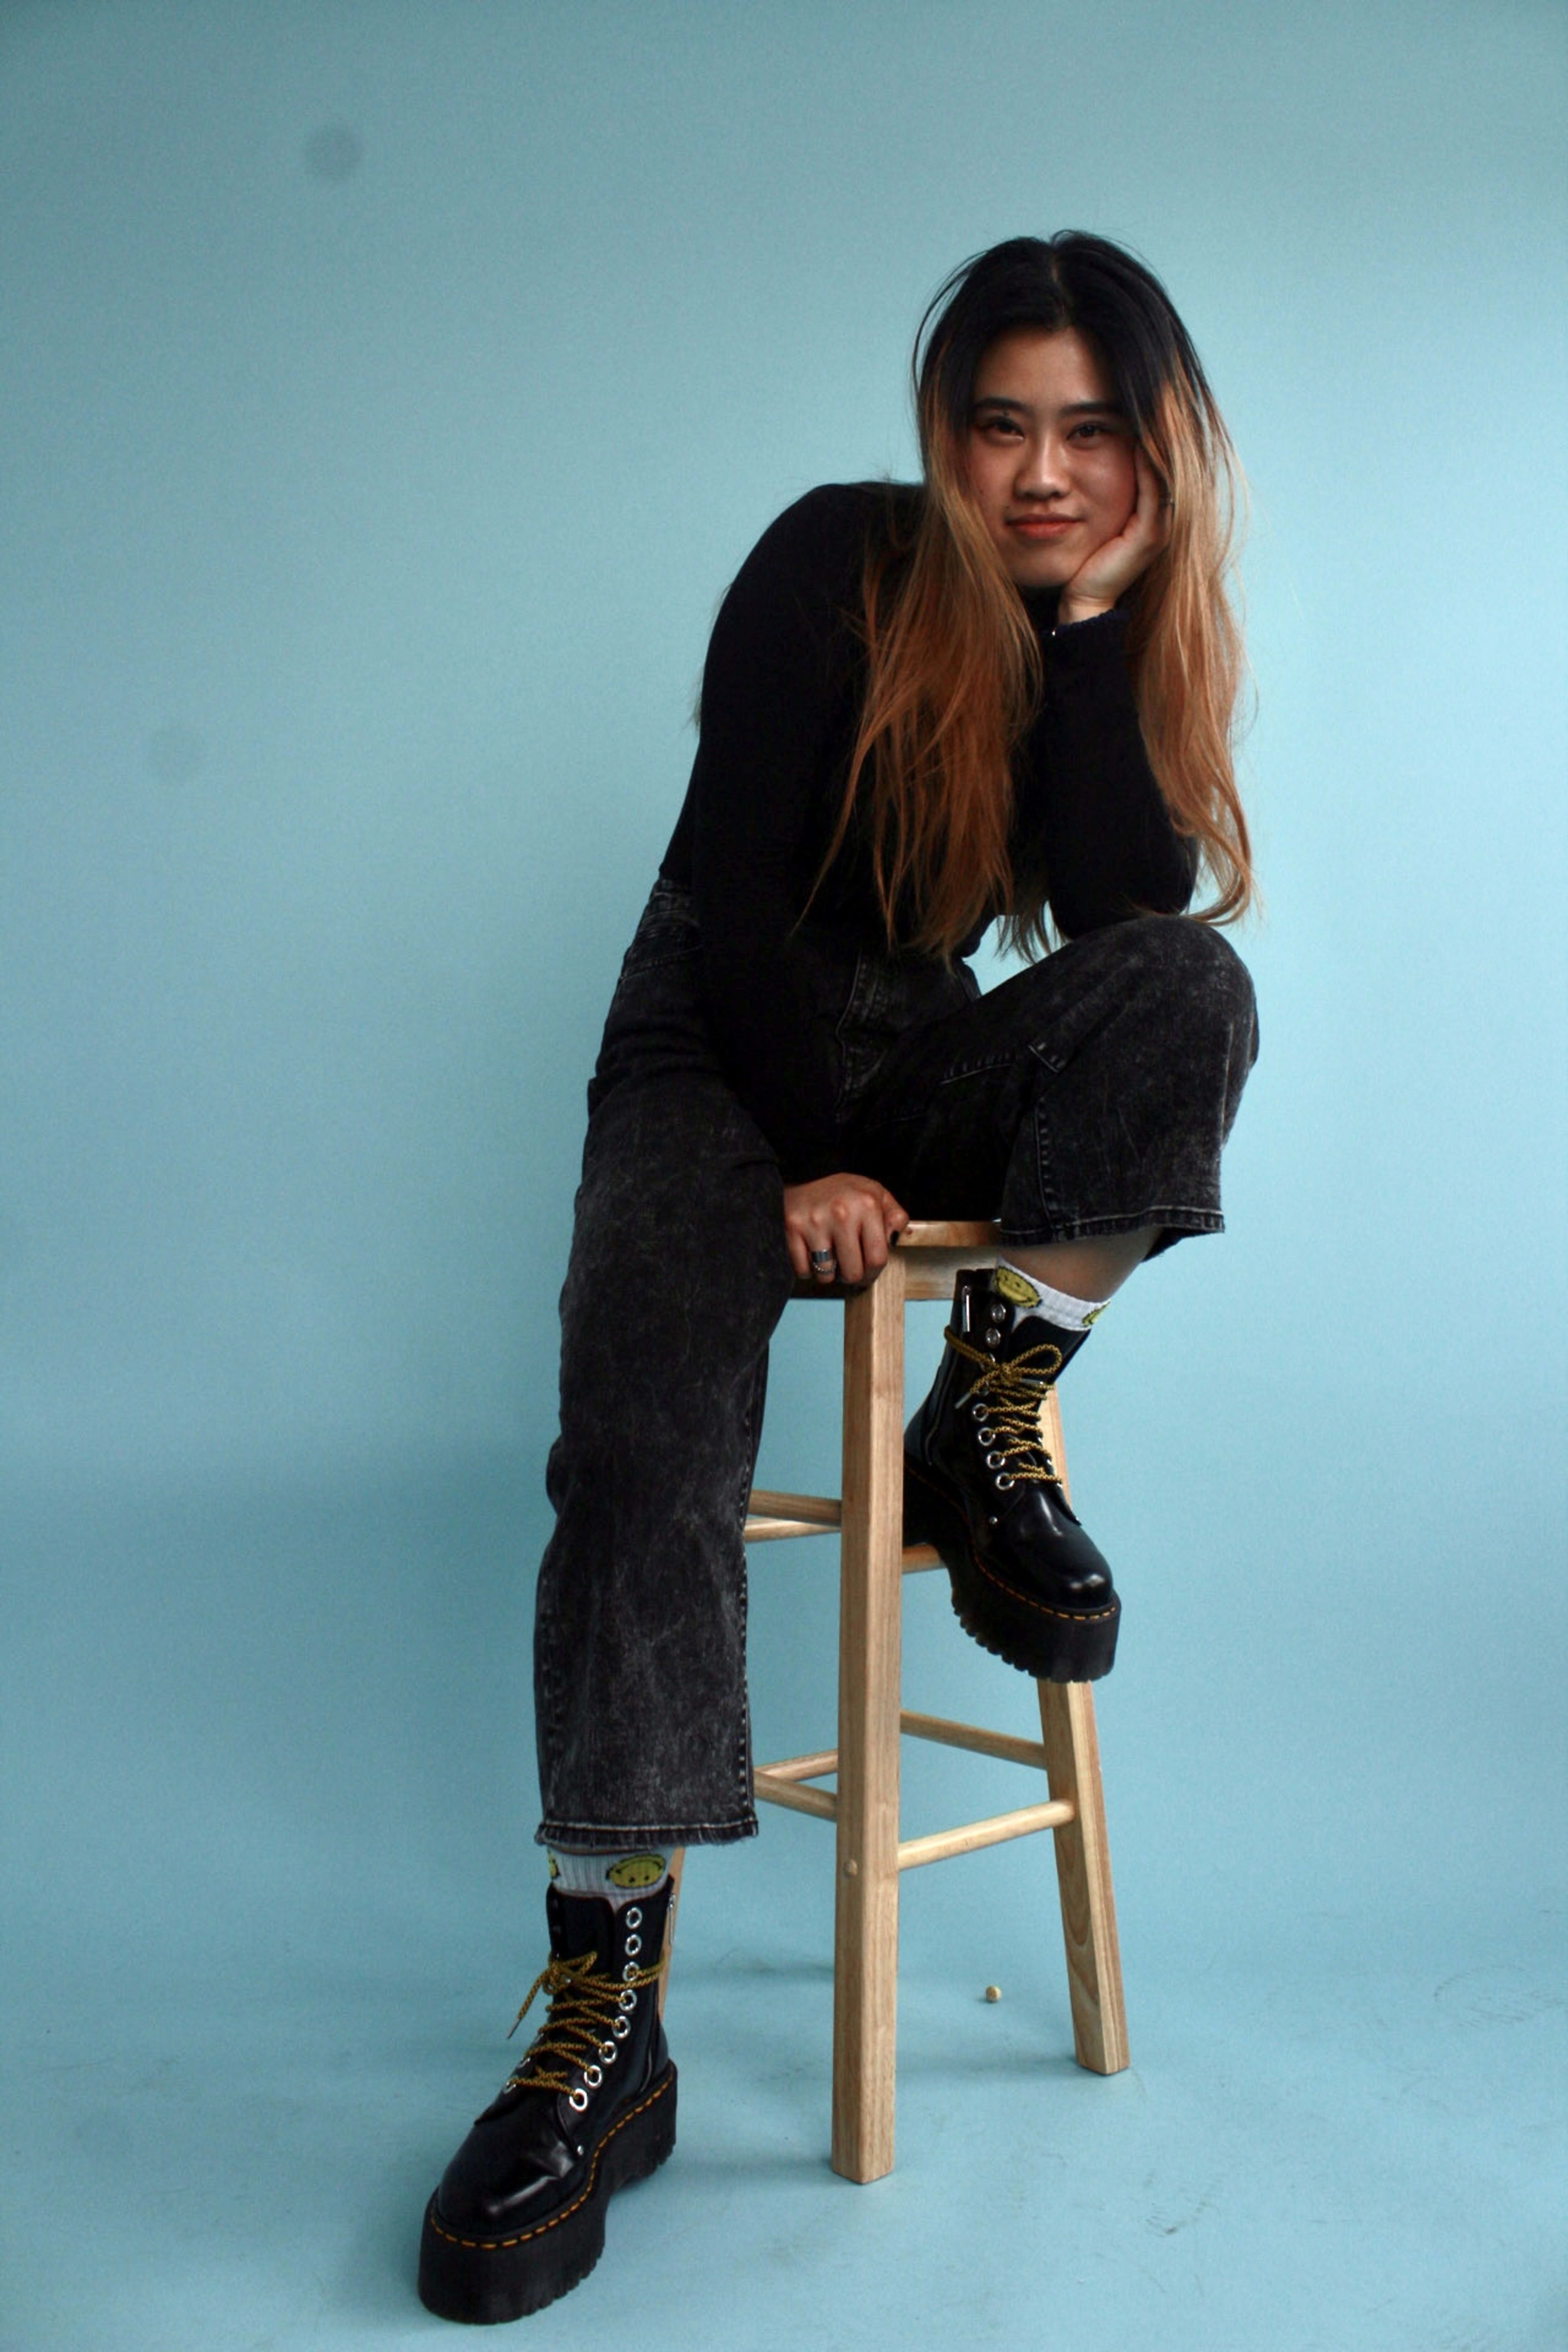 A woman sitting on a wooden stool for a photoshoot.